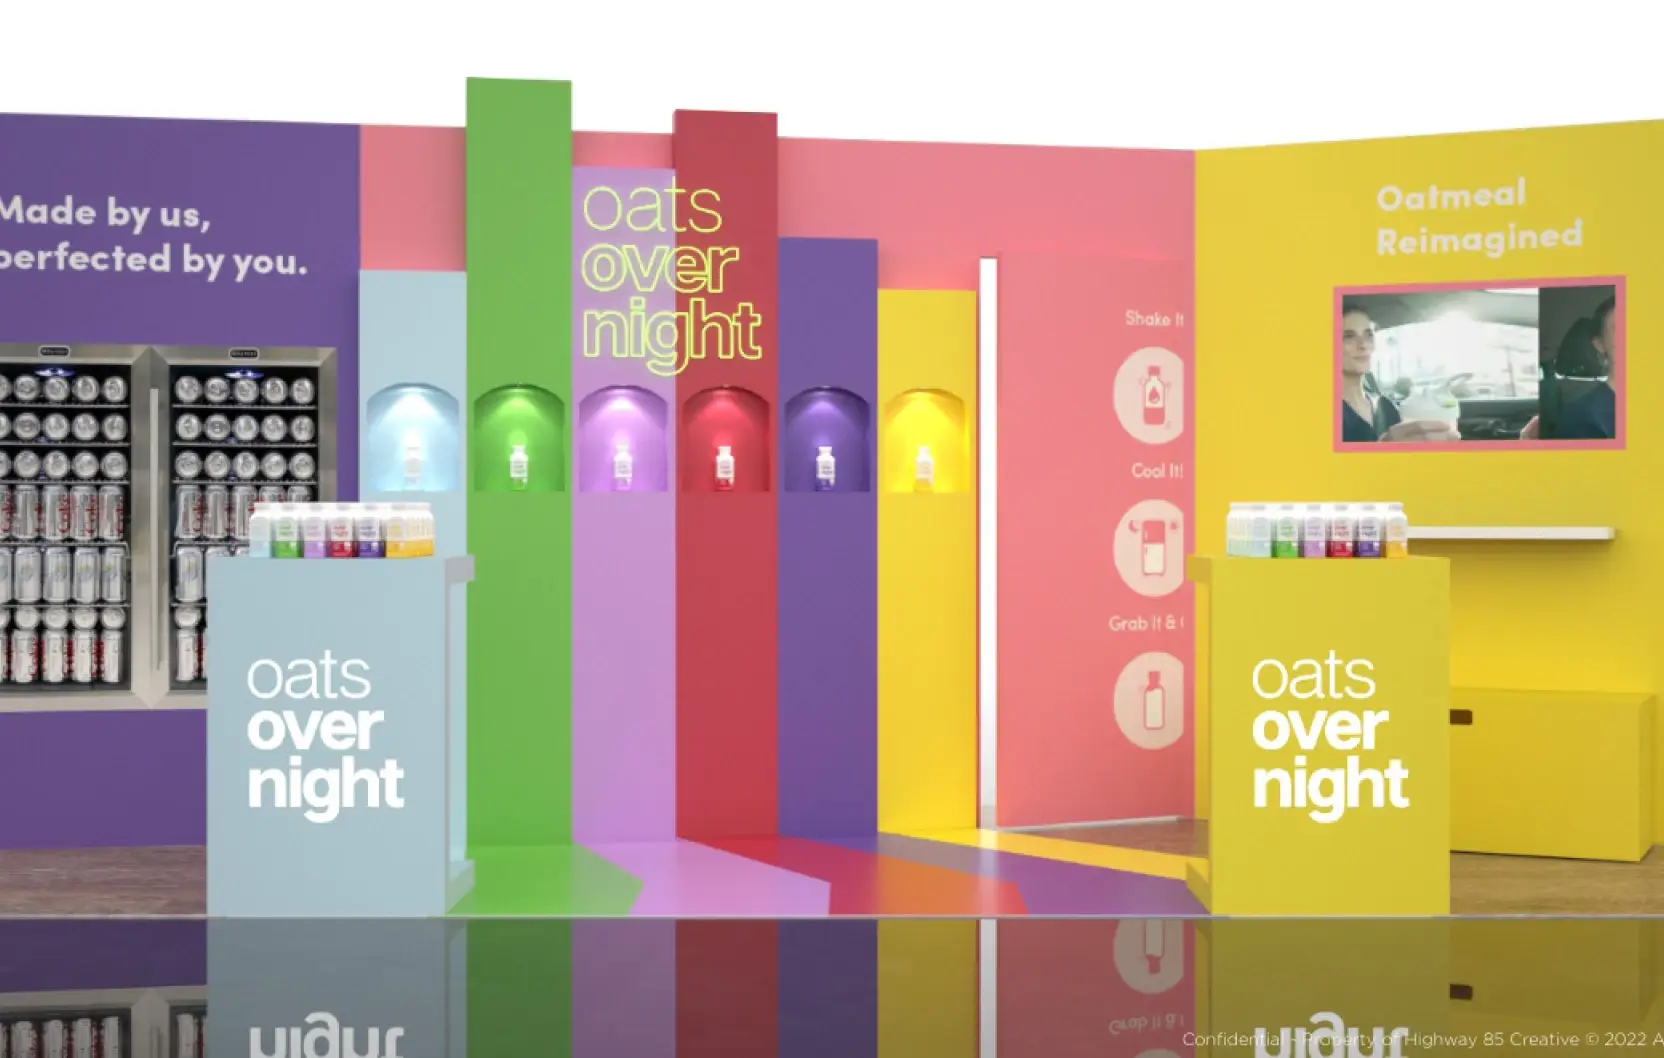 Oats Overnight's booth at Expo West featuring vibrant graphics and interactive elements.